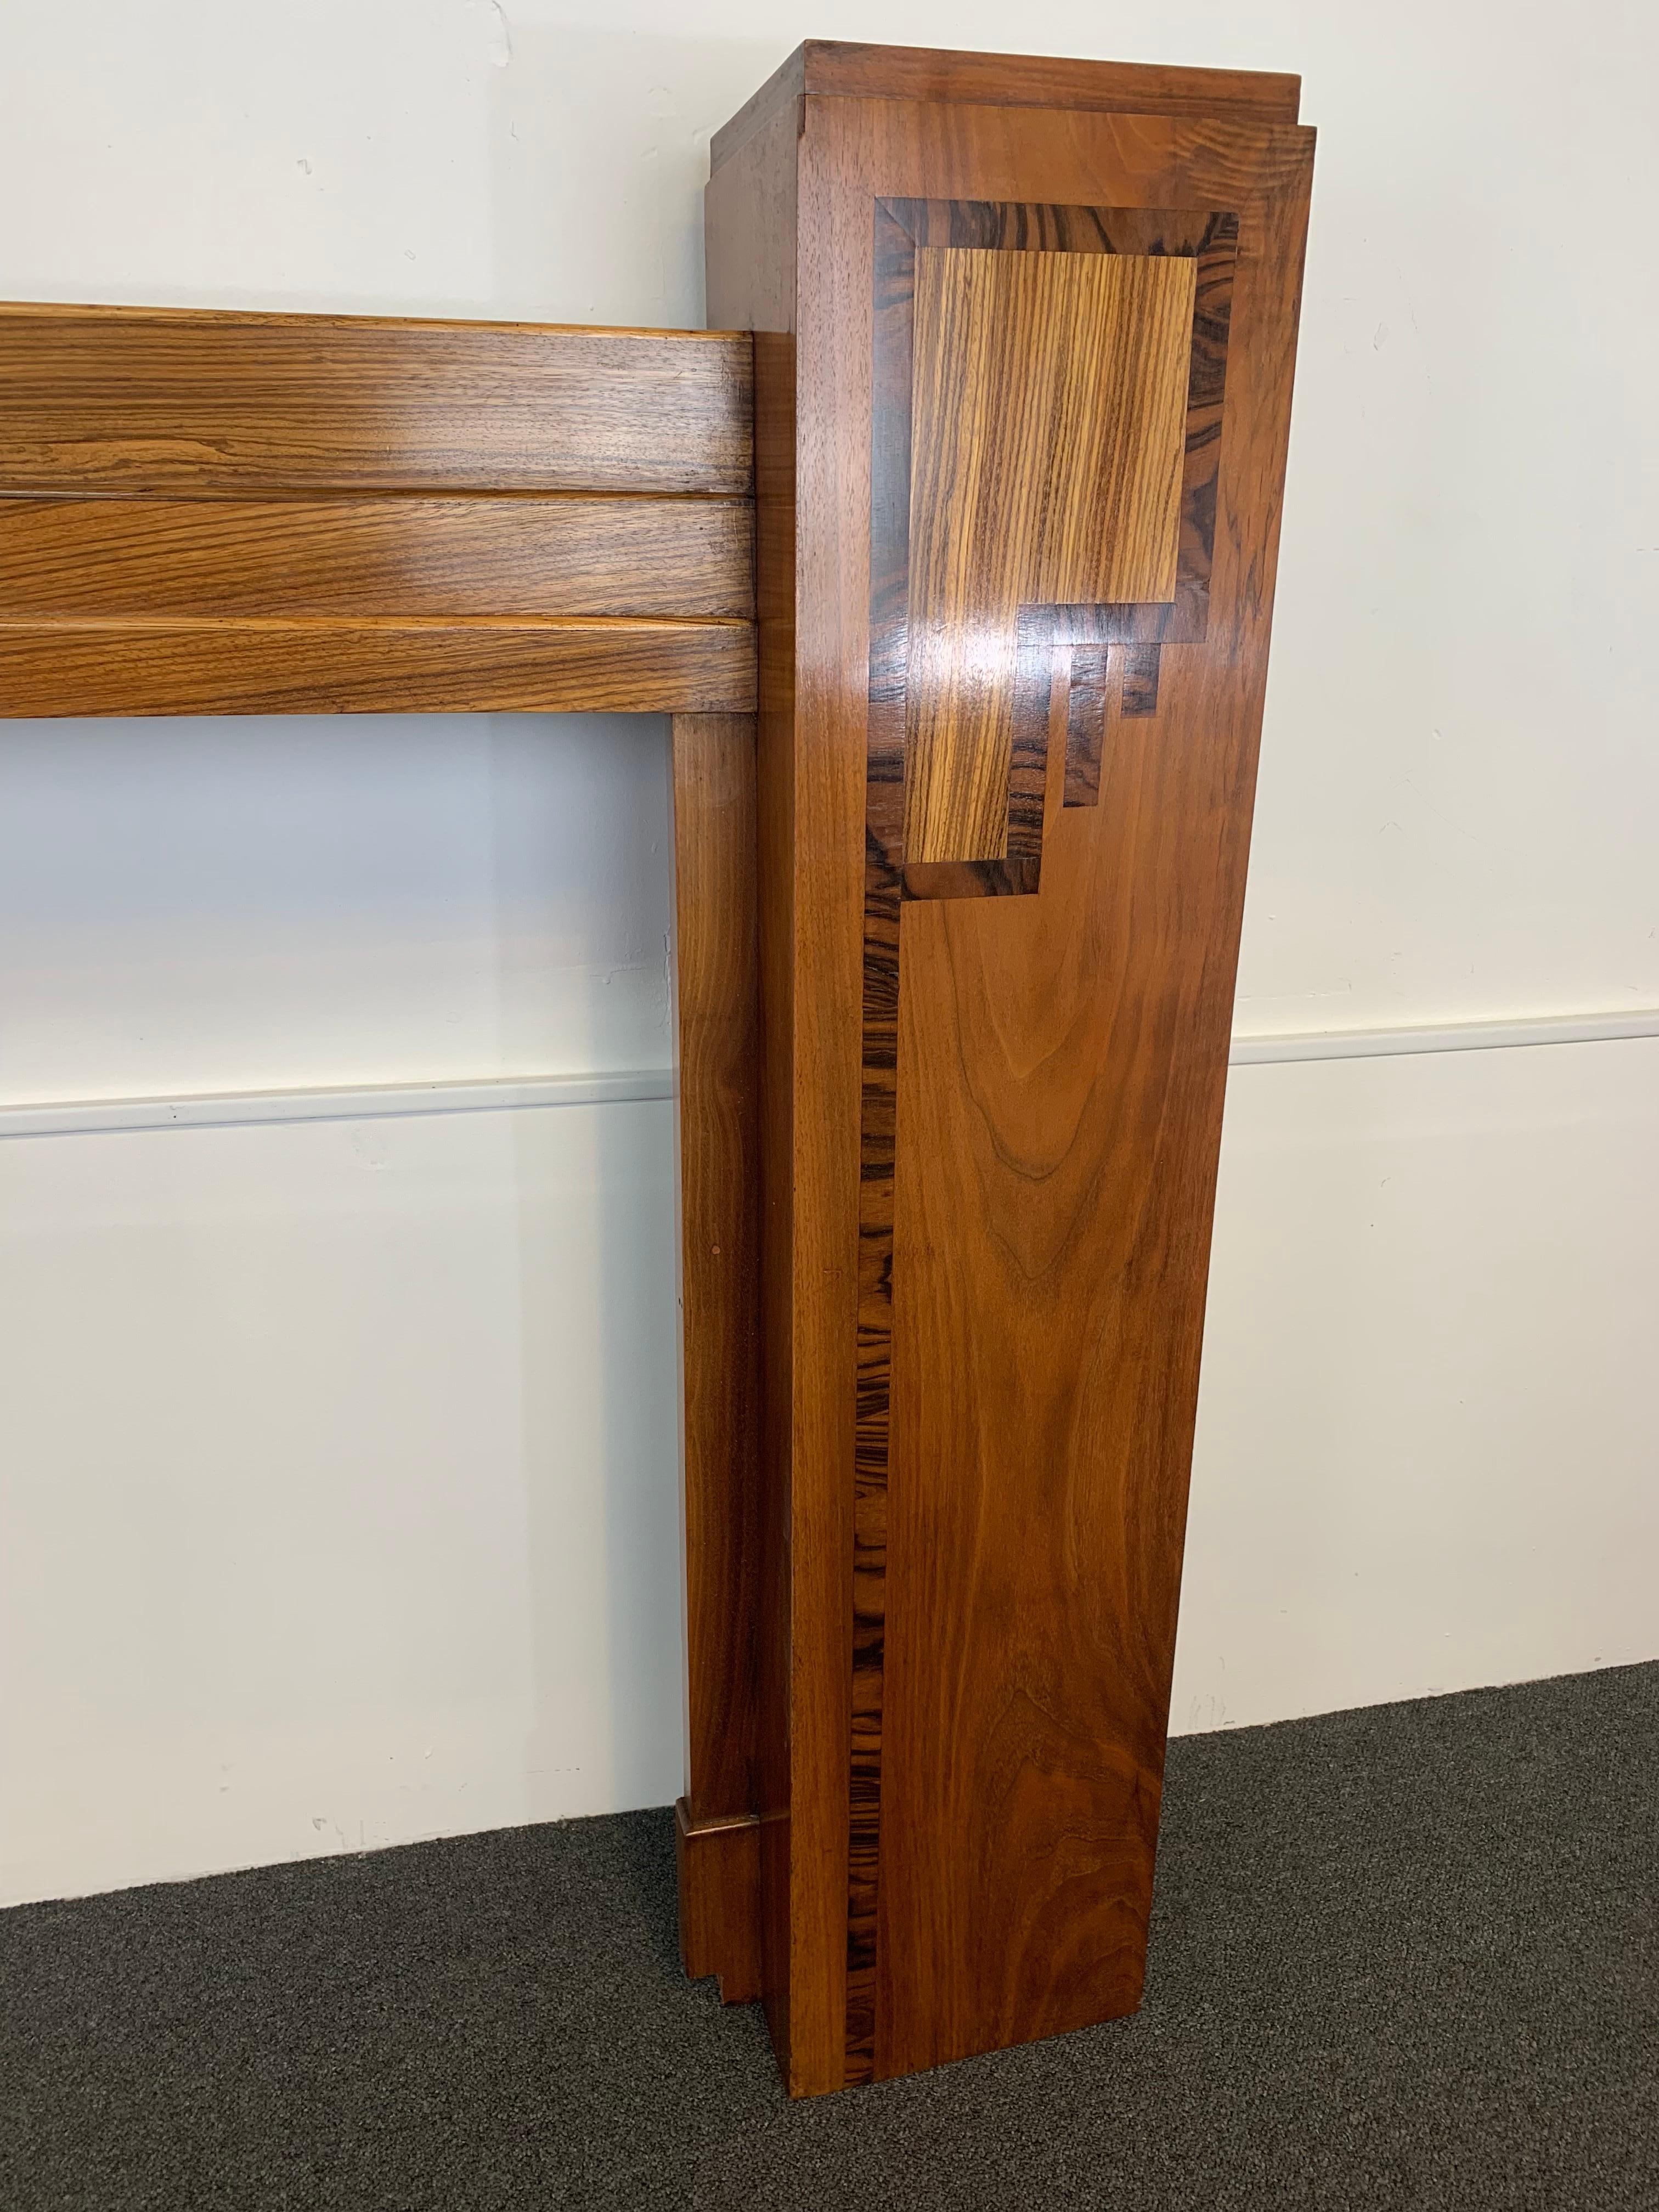 A superb quality abstract fire surround, from the Art Deco era.
Made of different woods, including oak, two types of walnut and calamander.
Beautifully constructed to shown Art Deco detailing, in both raised and inlay of woods.
A striking focal